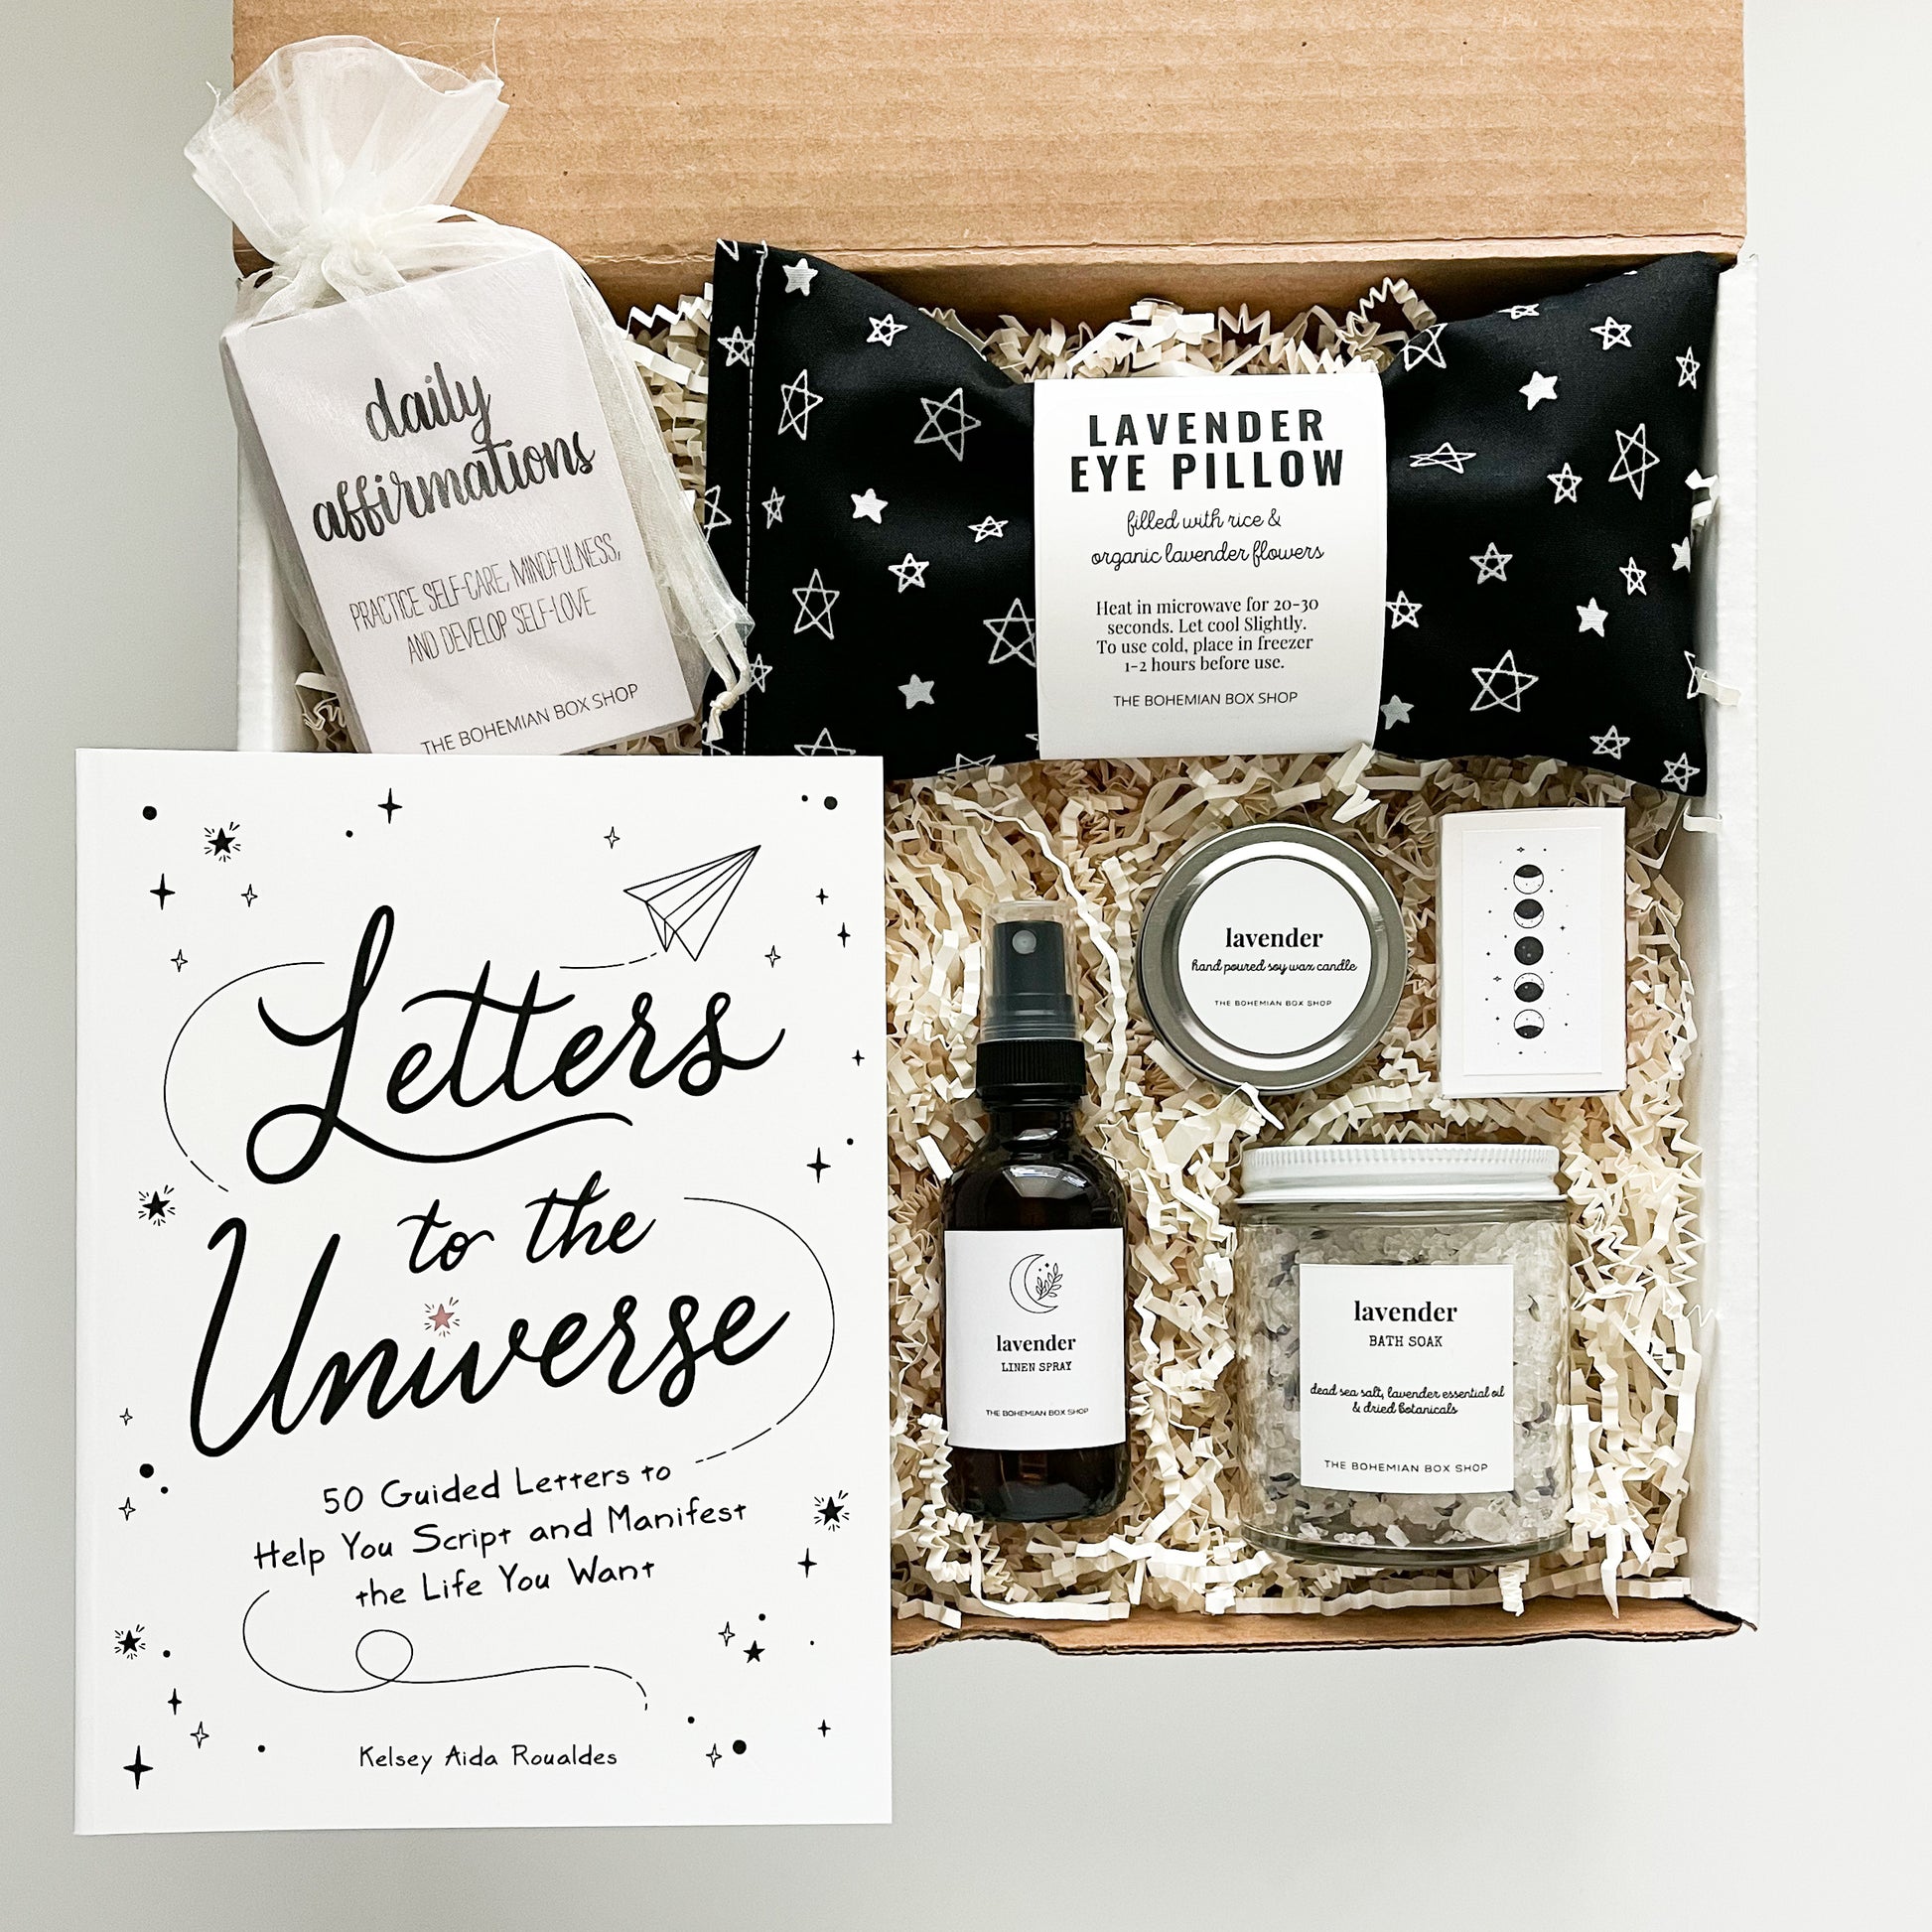 manifest the life you want gift box